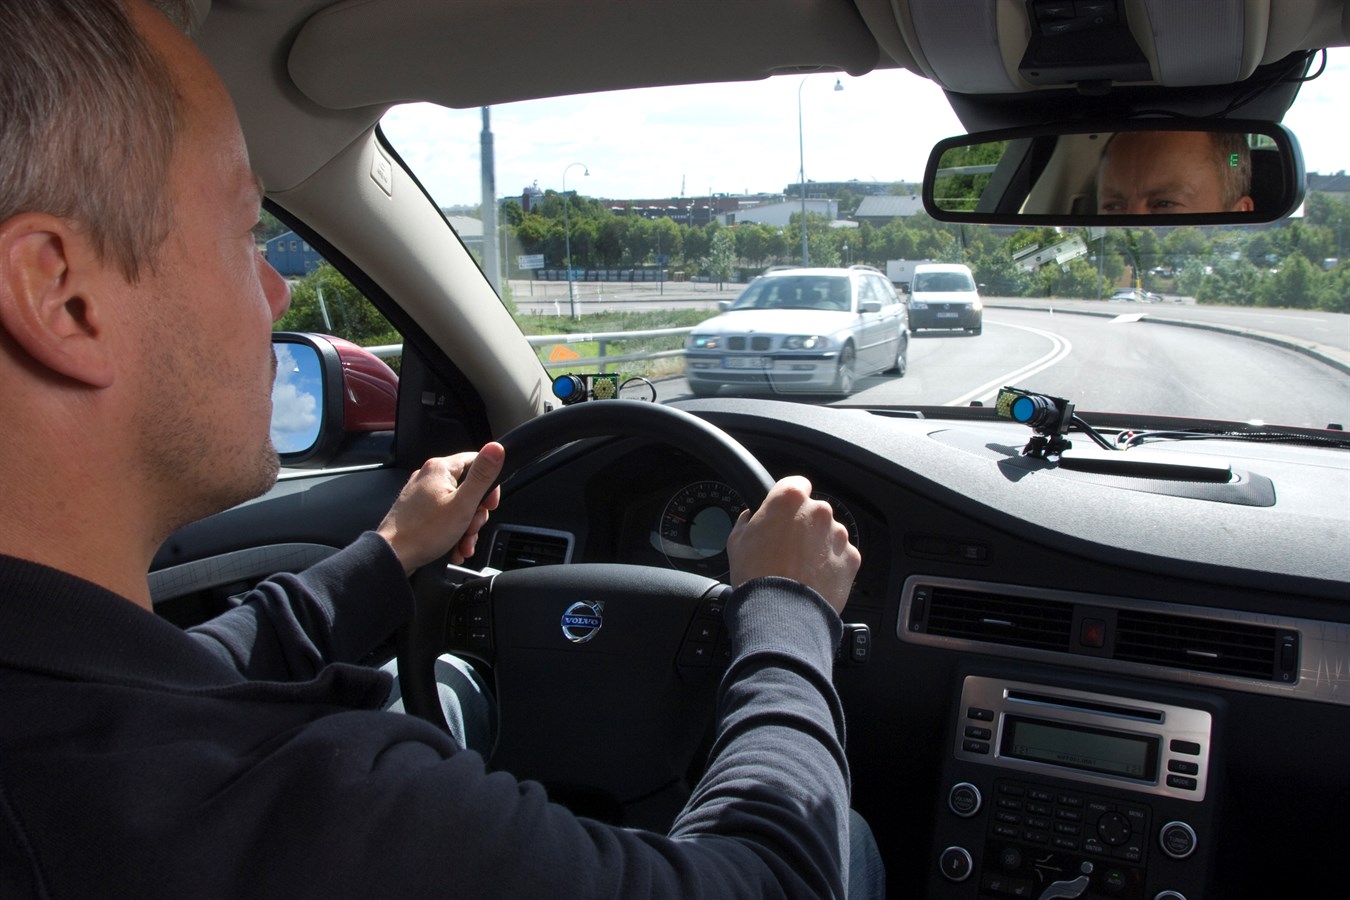 SAFER – EuroFOT. Field operational tests - The driver's behaviour is measured, eye movements etc.